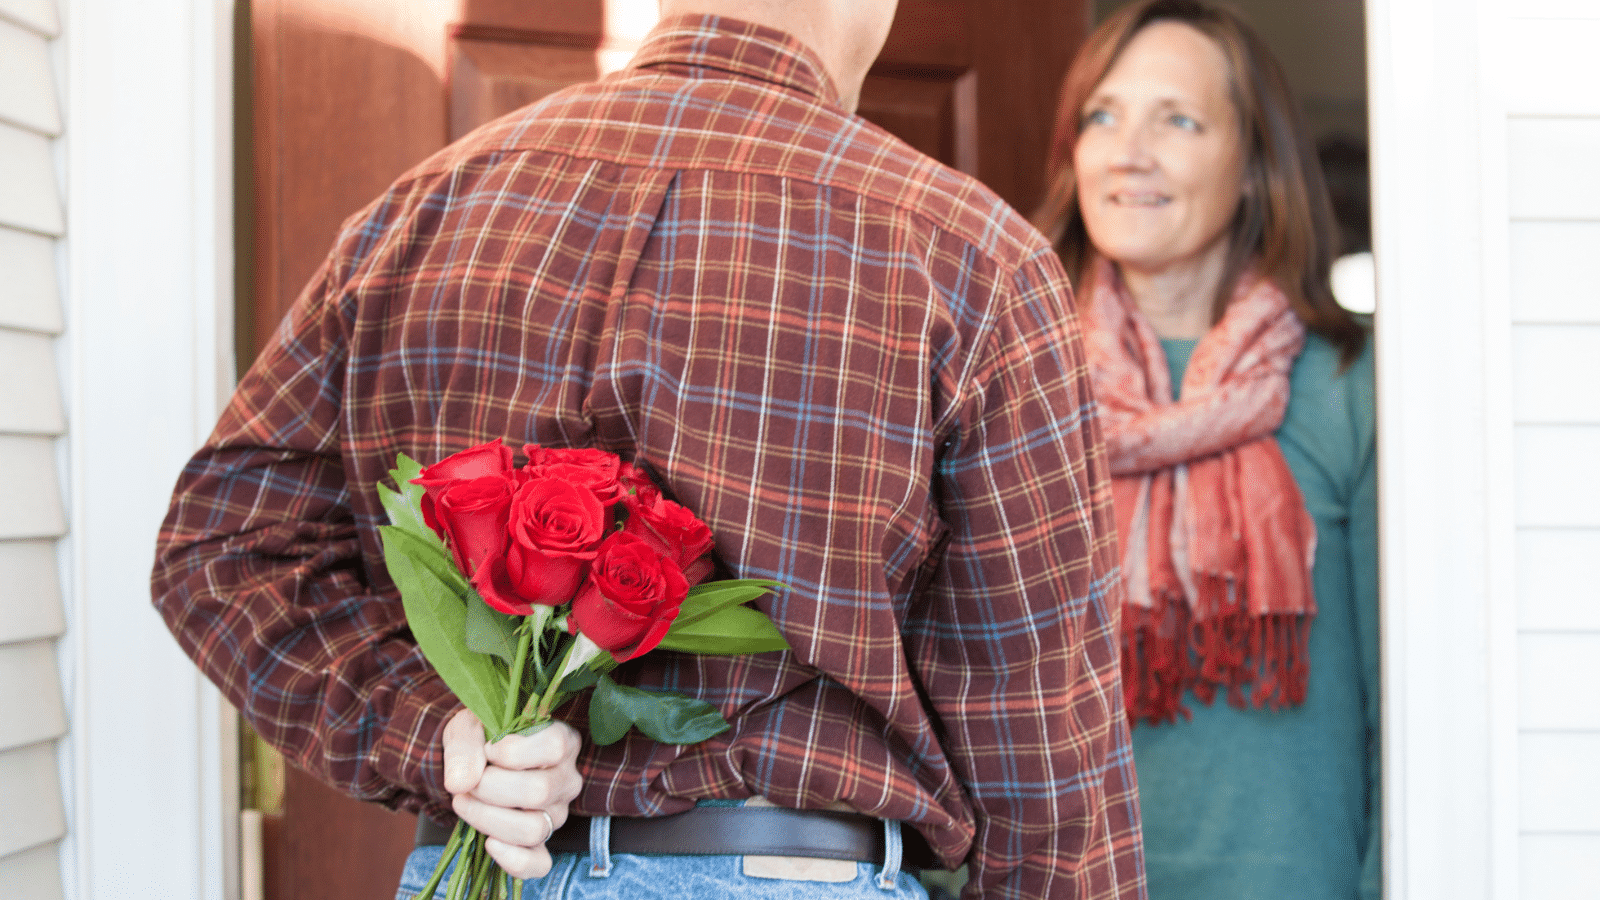 Man surprising his wife with flowers.